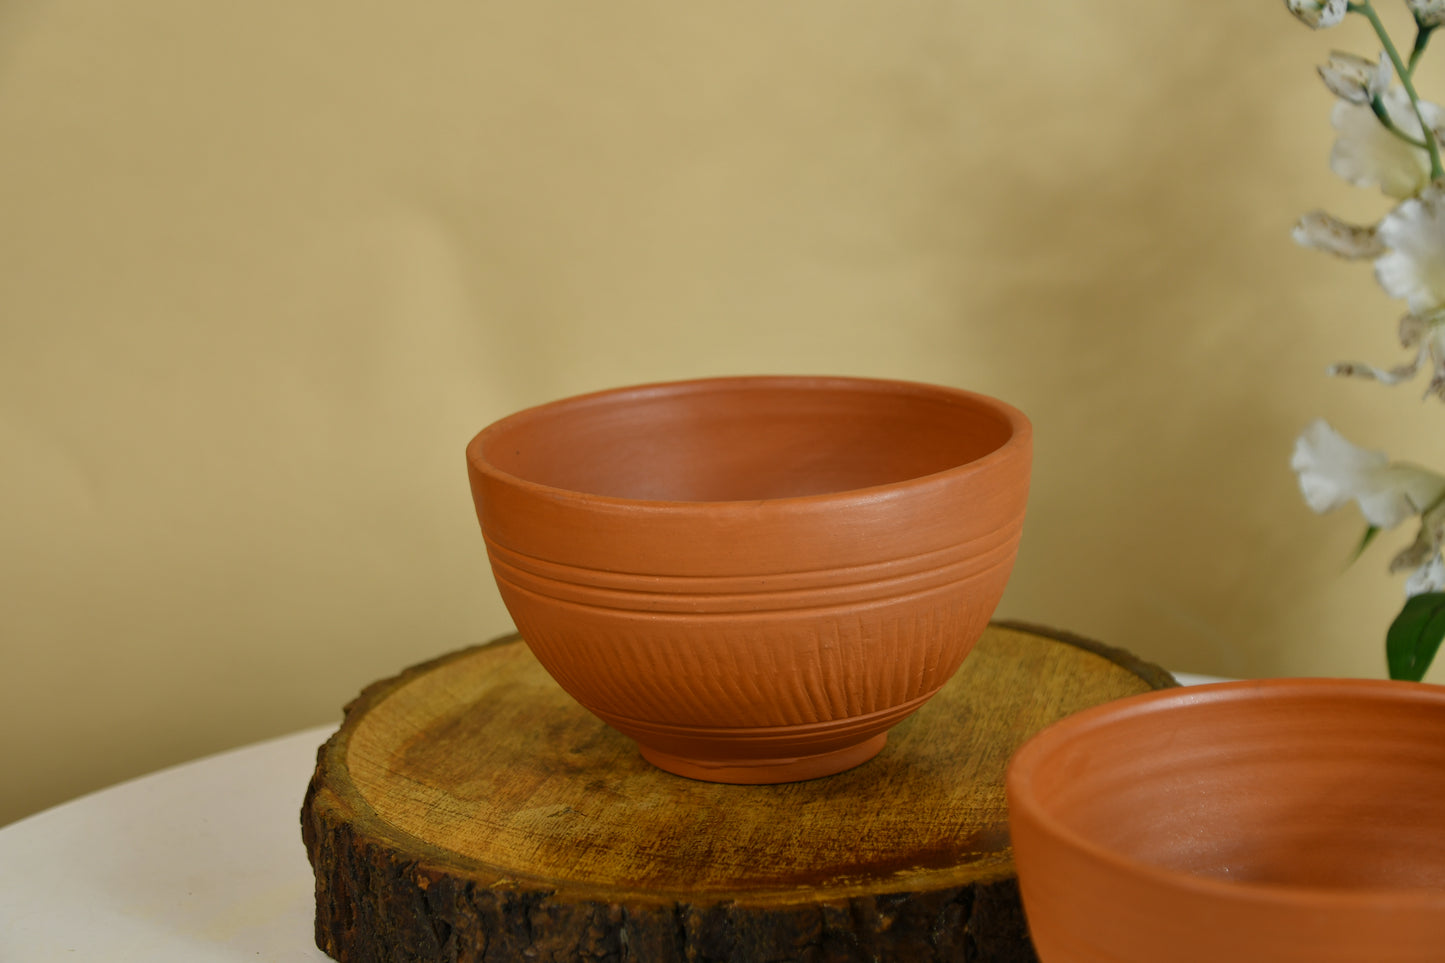 Sowpeace Handcrafted Terracotta Soup Bowl: Artful Kitchenware & Decor